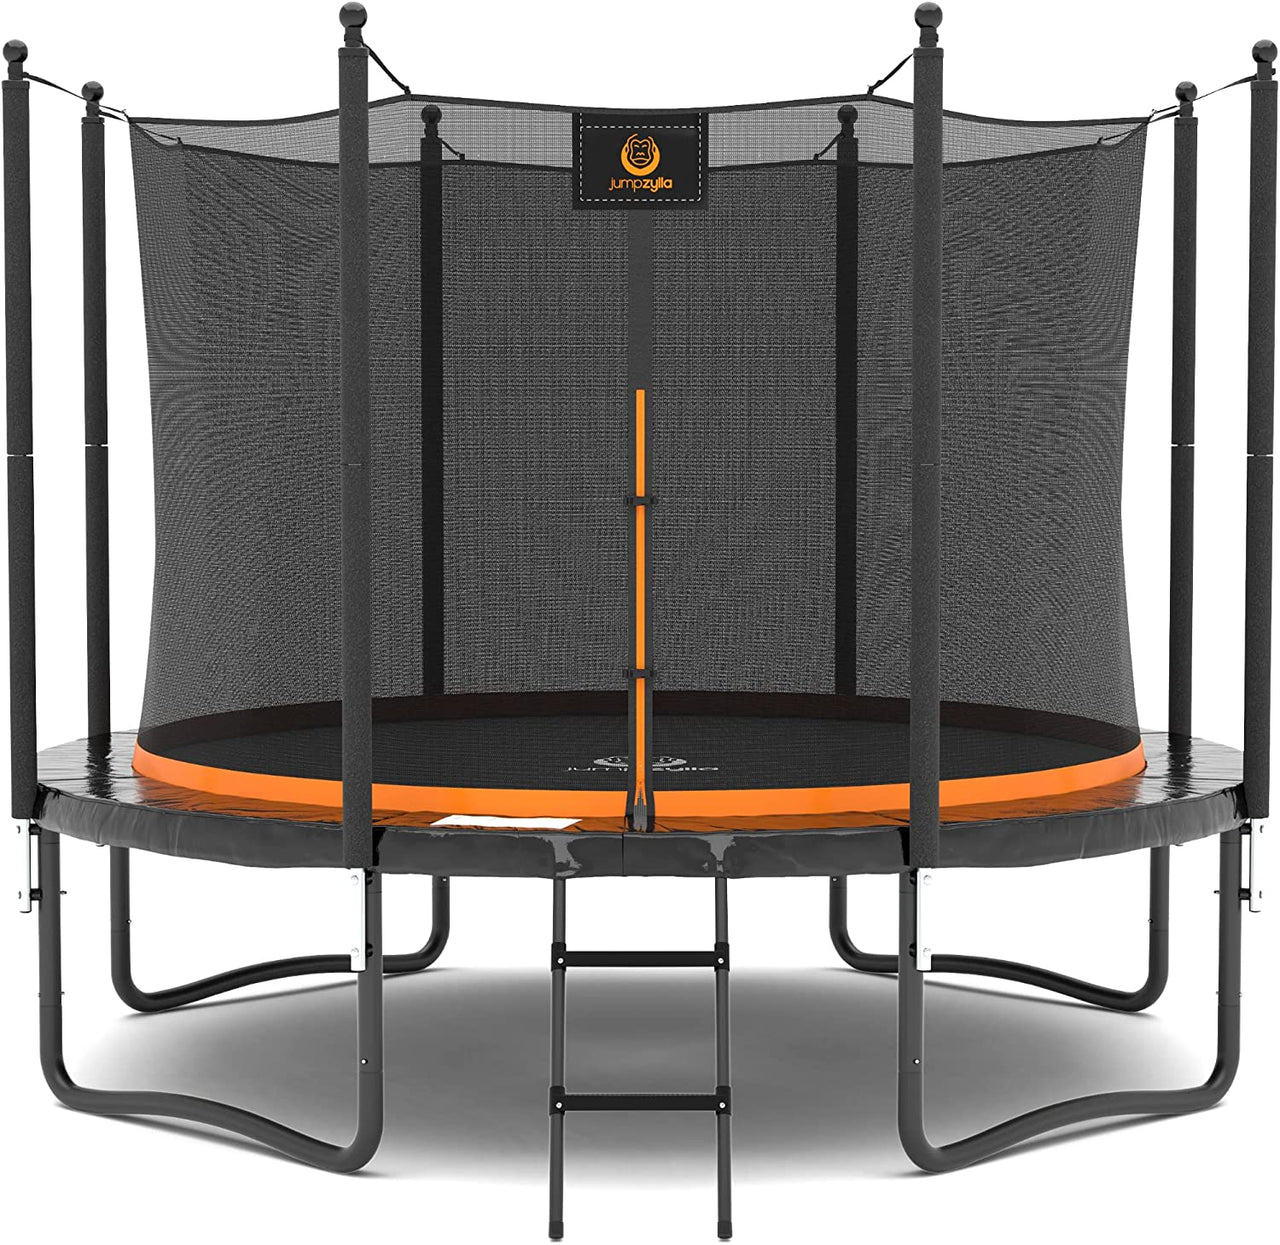 Jumpzylla Model S - Trampoline for Kids and Adults 10 FT, 12 FT, 14 FT